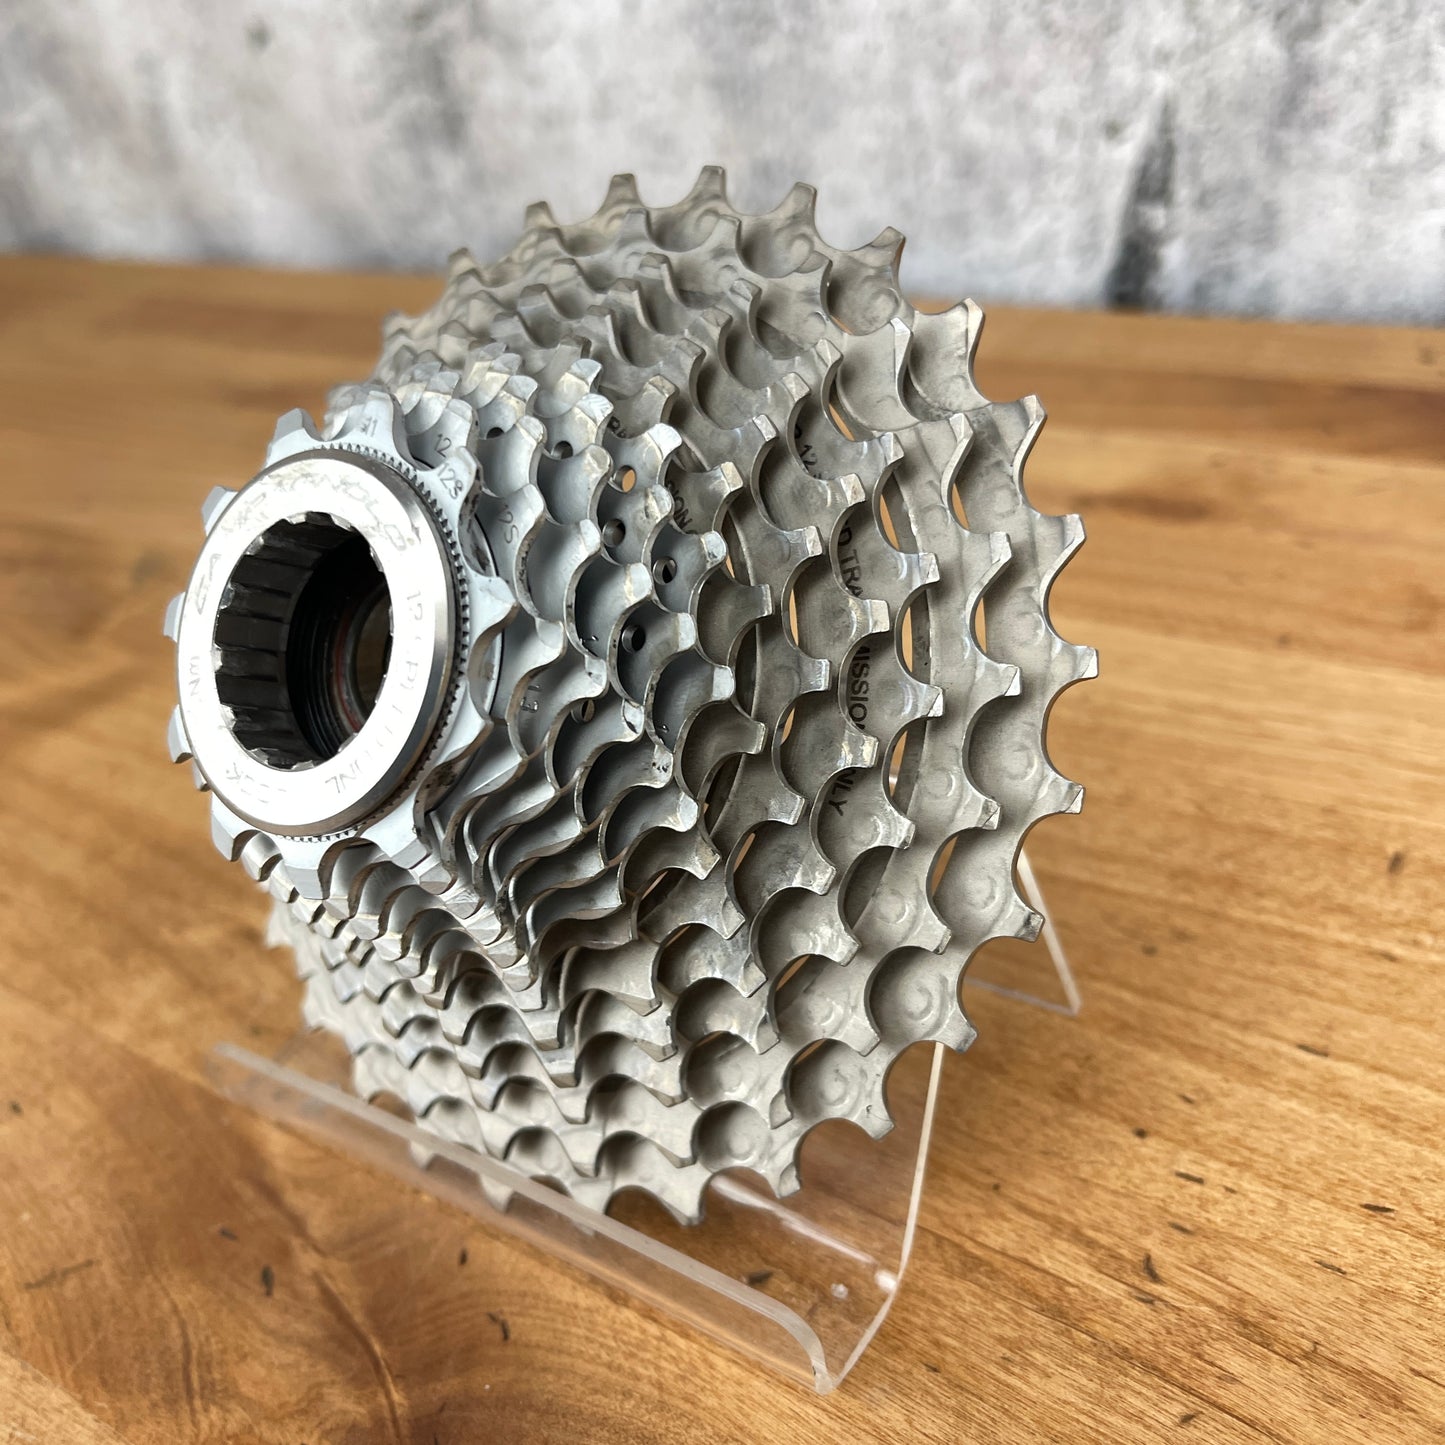 Campagnolo Super Record 12 11-29t 12-Speed Bicycle Cassette "Typical Wear" 272g